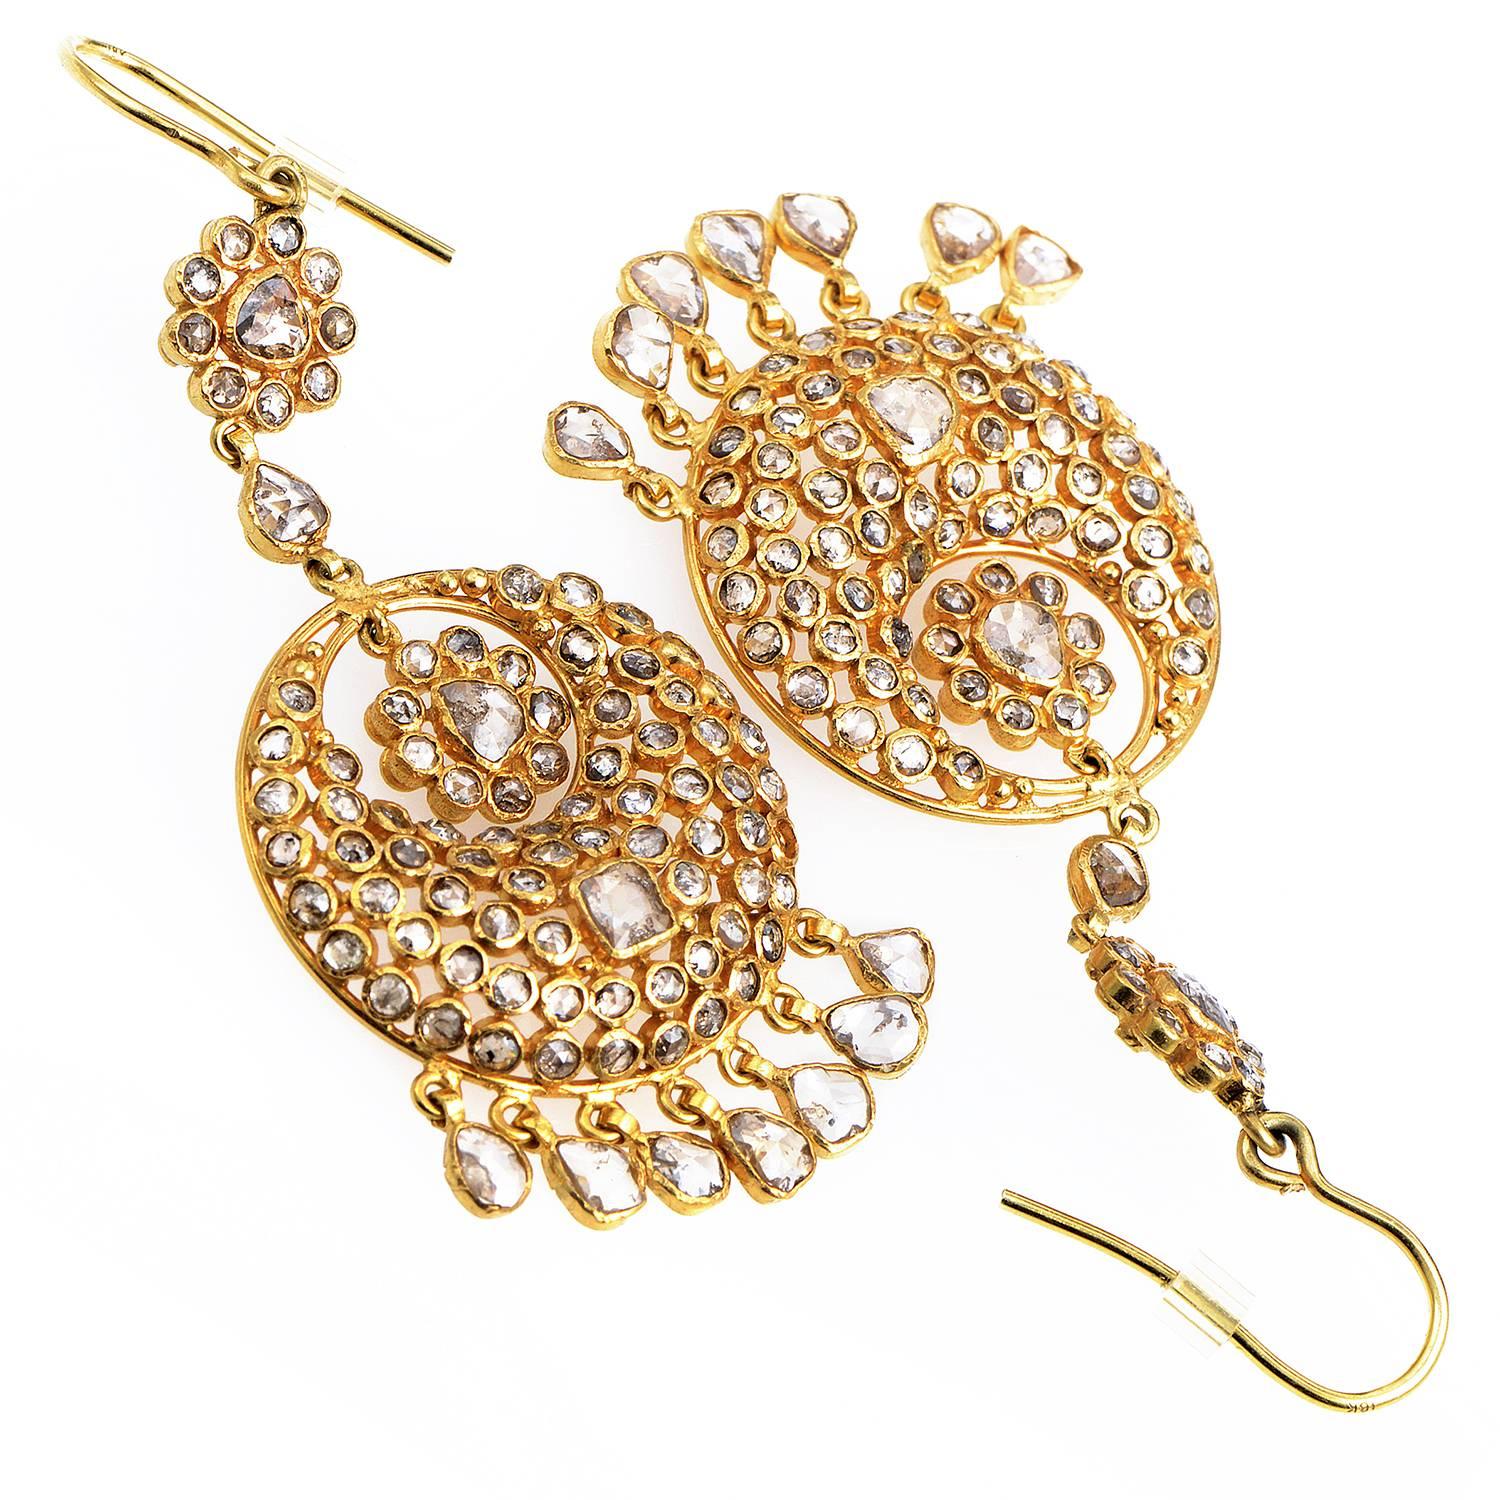 A spellbinding sight and an artistically brilliant design, these fascinating earrings embellish the enchanting radiance of exceptionally shaped 24K yellow gold with scintillating setting of rose-cut diamonds weighing in total approximately 5.00